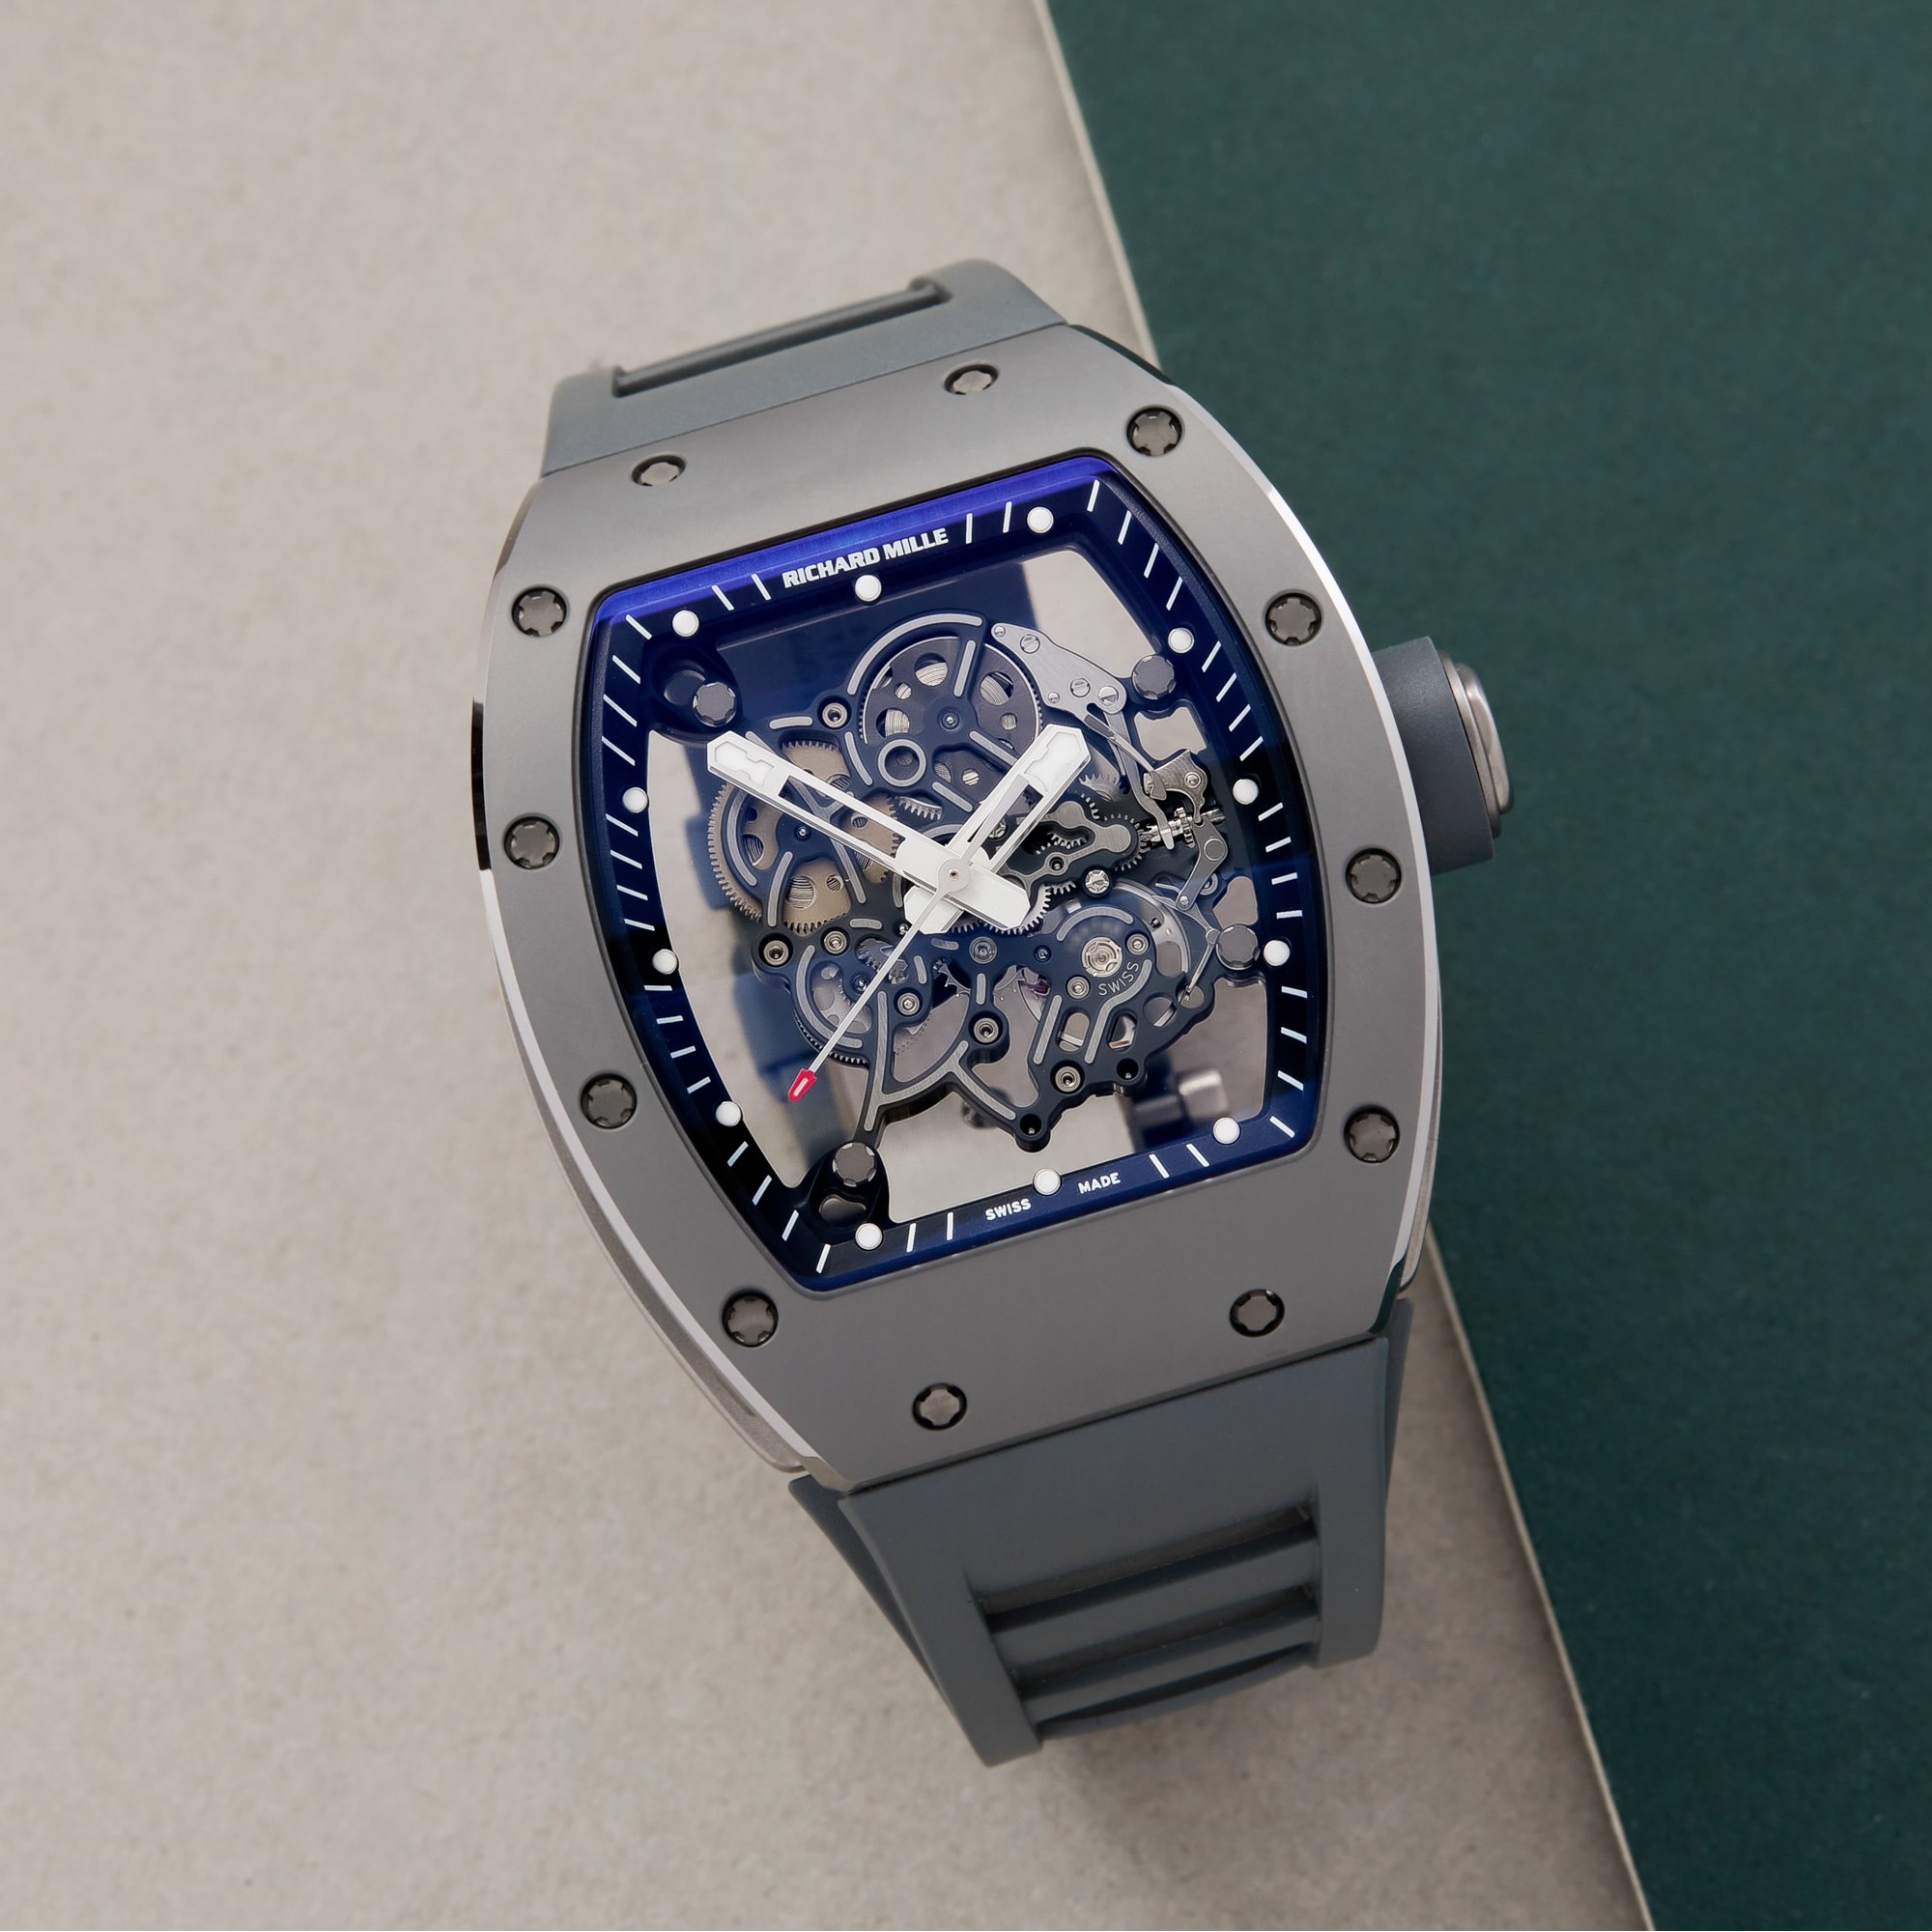 Richard Mille RM055 Bubba Watson Grey Boutique Limited Edition Of 50 Pieces Titanium RM055